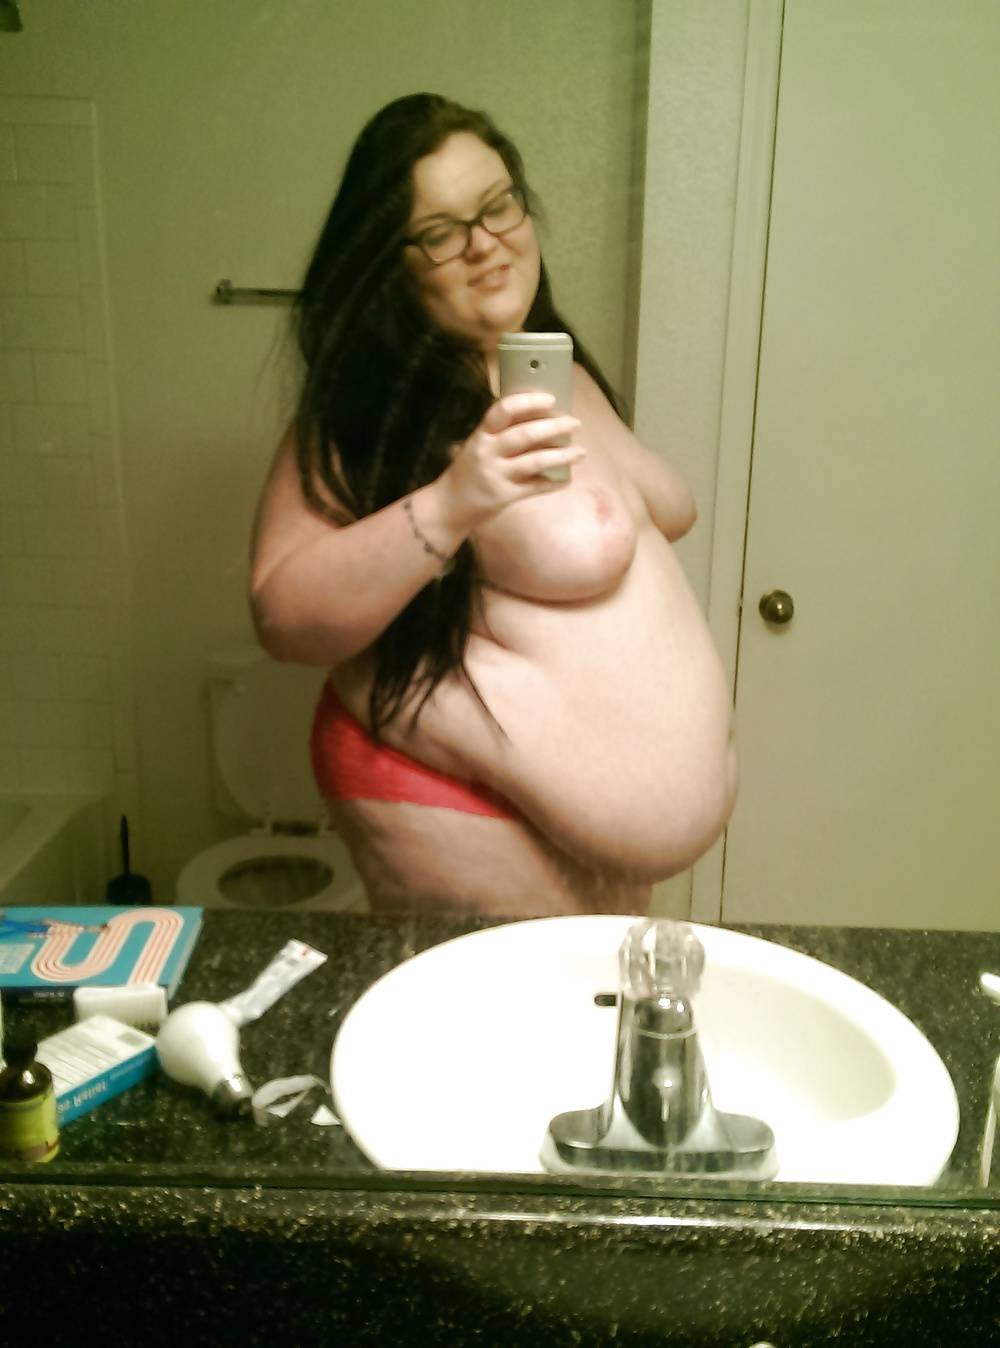 BBW's with nice Tit's, Asses and Bellies 2